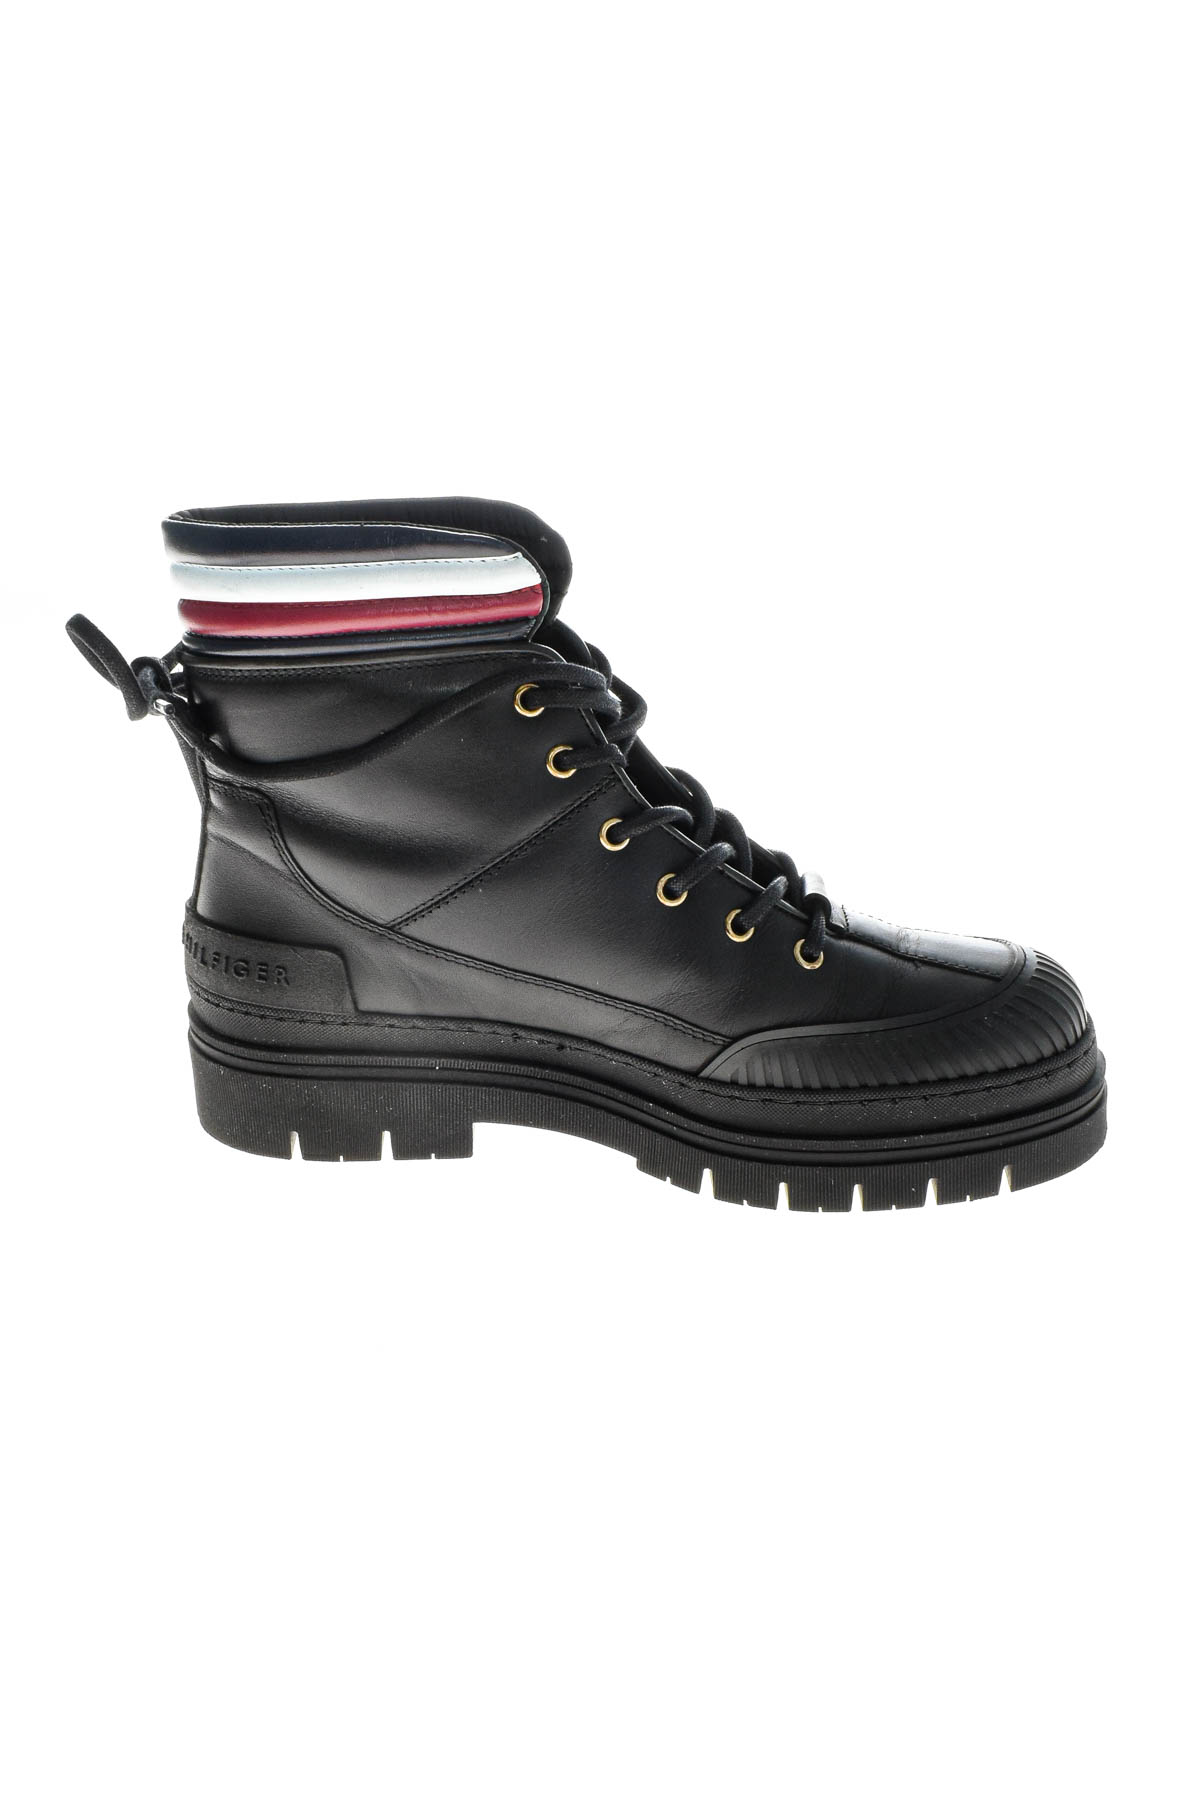 Women's boots - TOMMY HILFIGER - 2